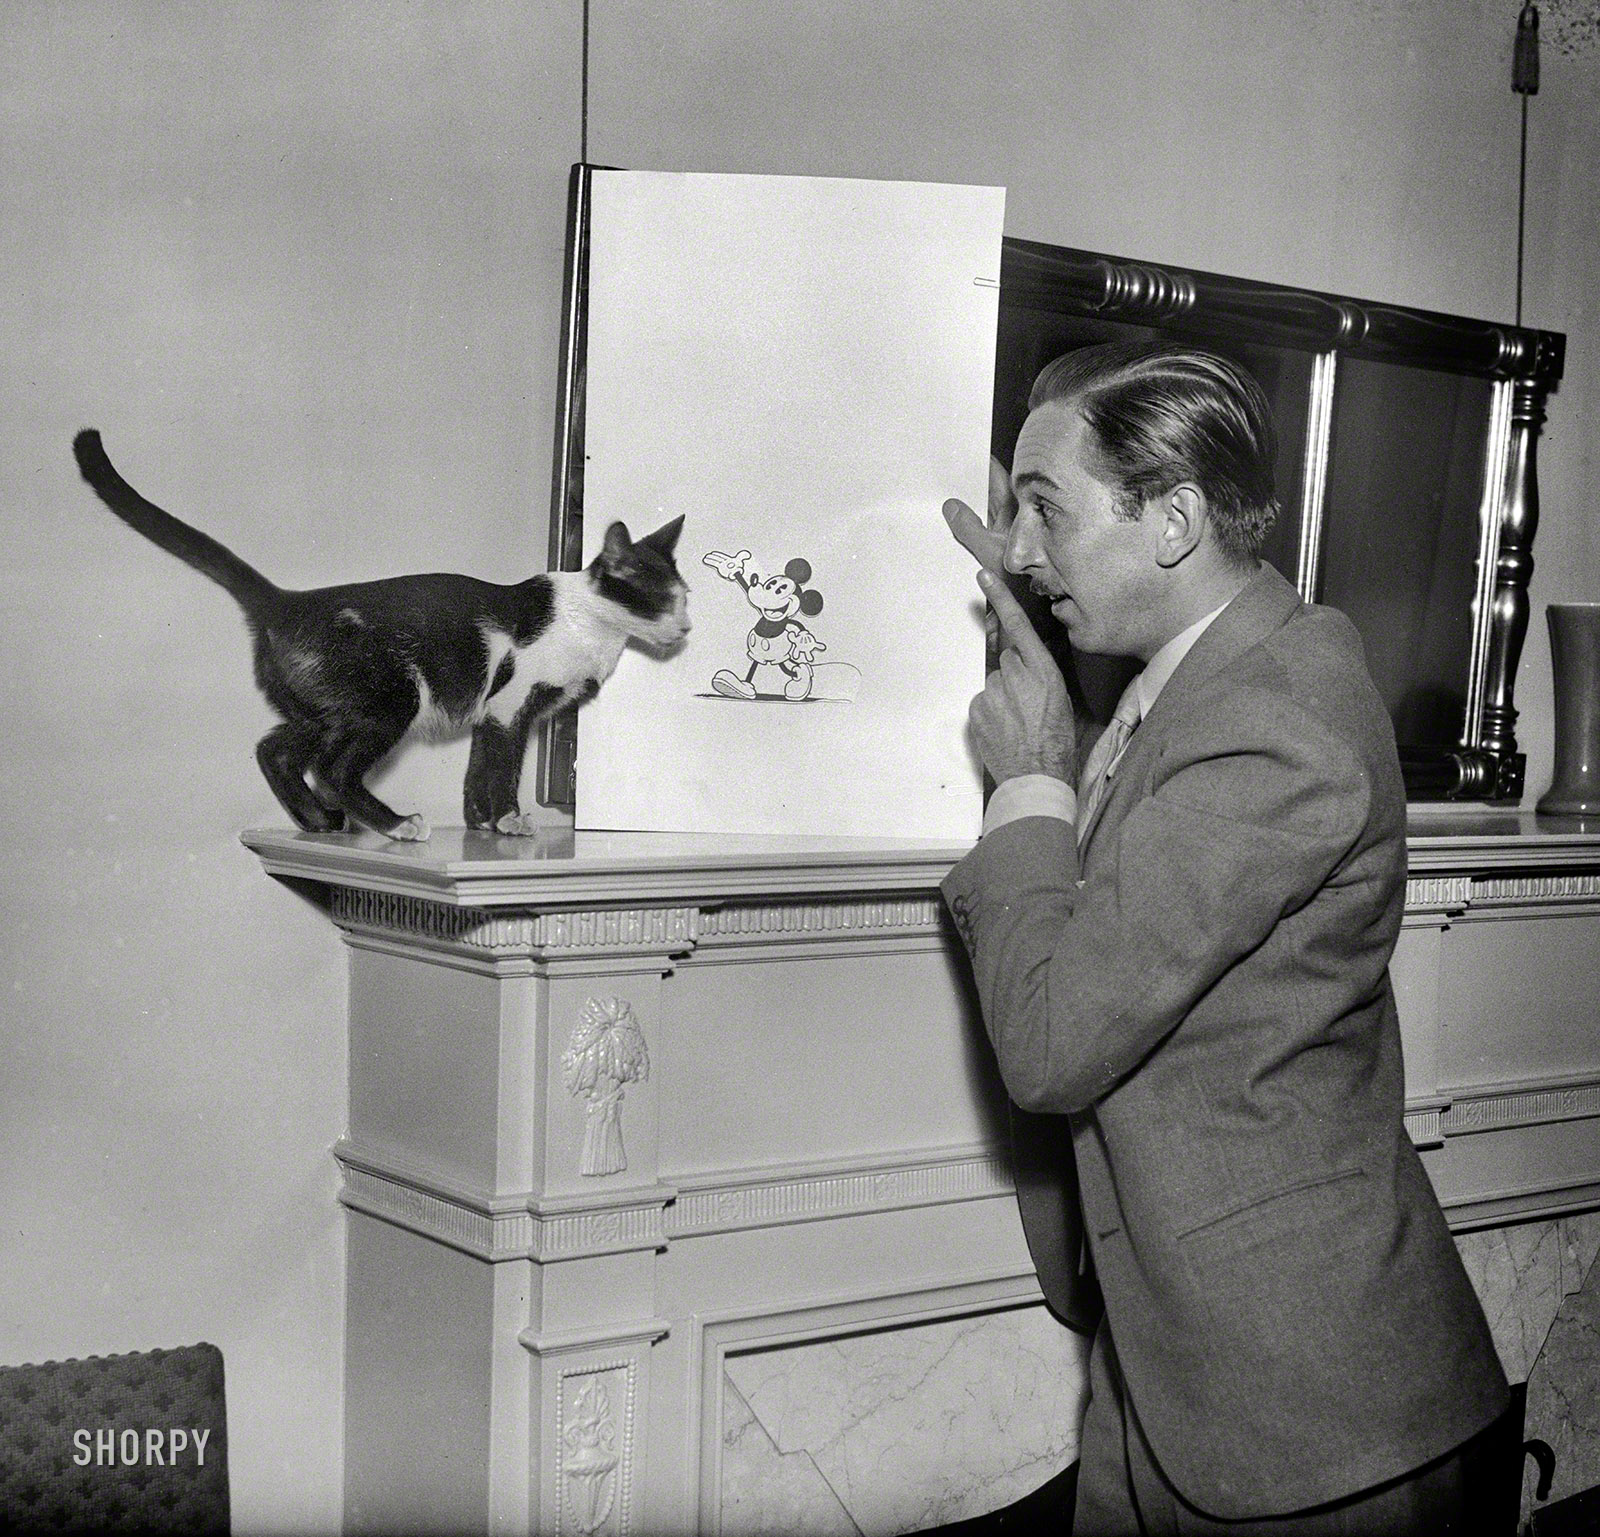 Washington, D.C., circa 1931. "Walt Disney with Mickey Mouse drawing." One day he'll be bigger than you, cat! Harris & Ewing glass negative. View full size.